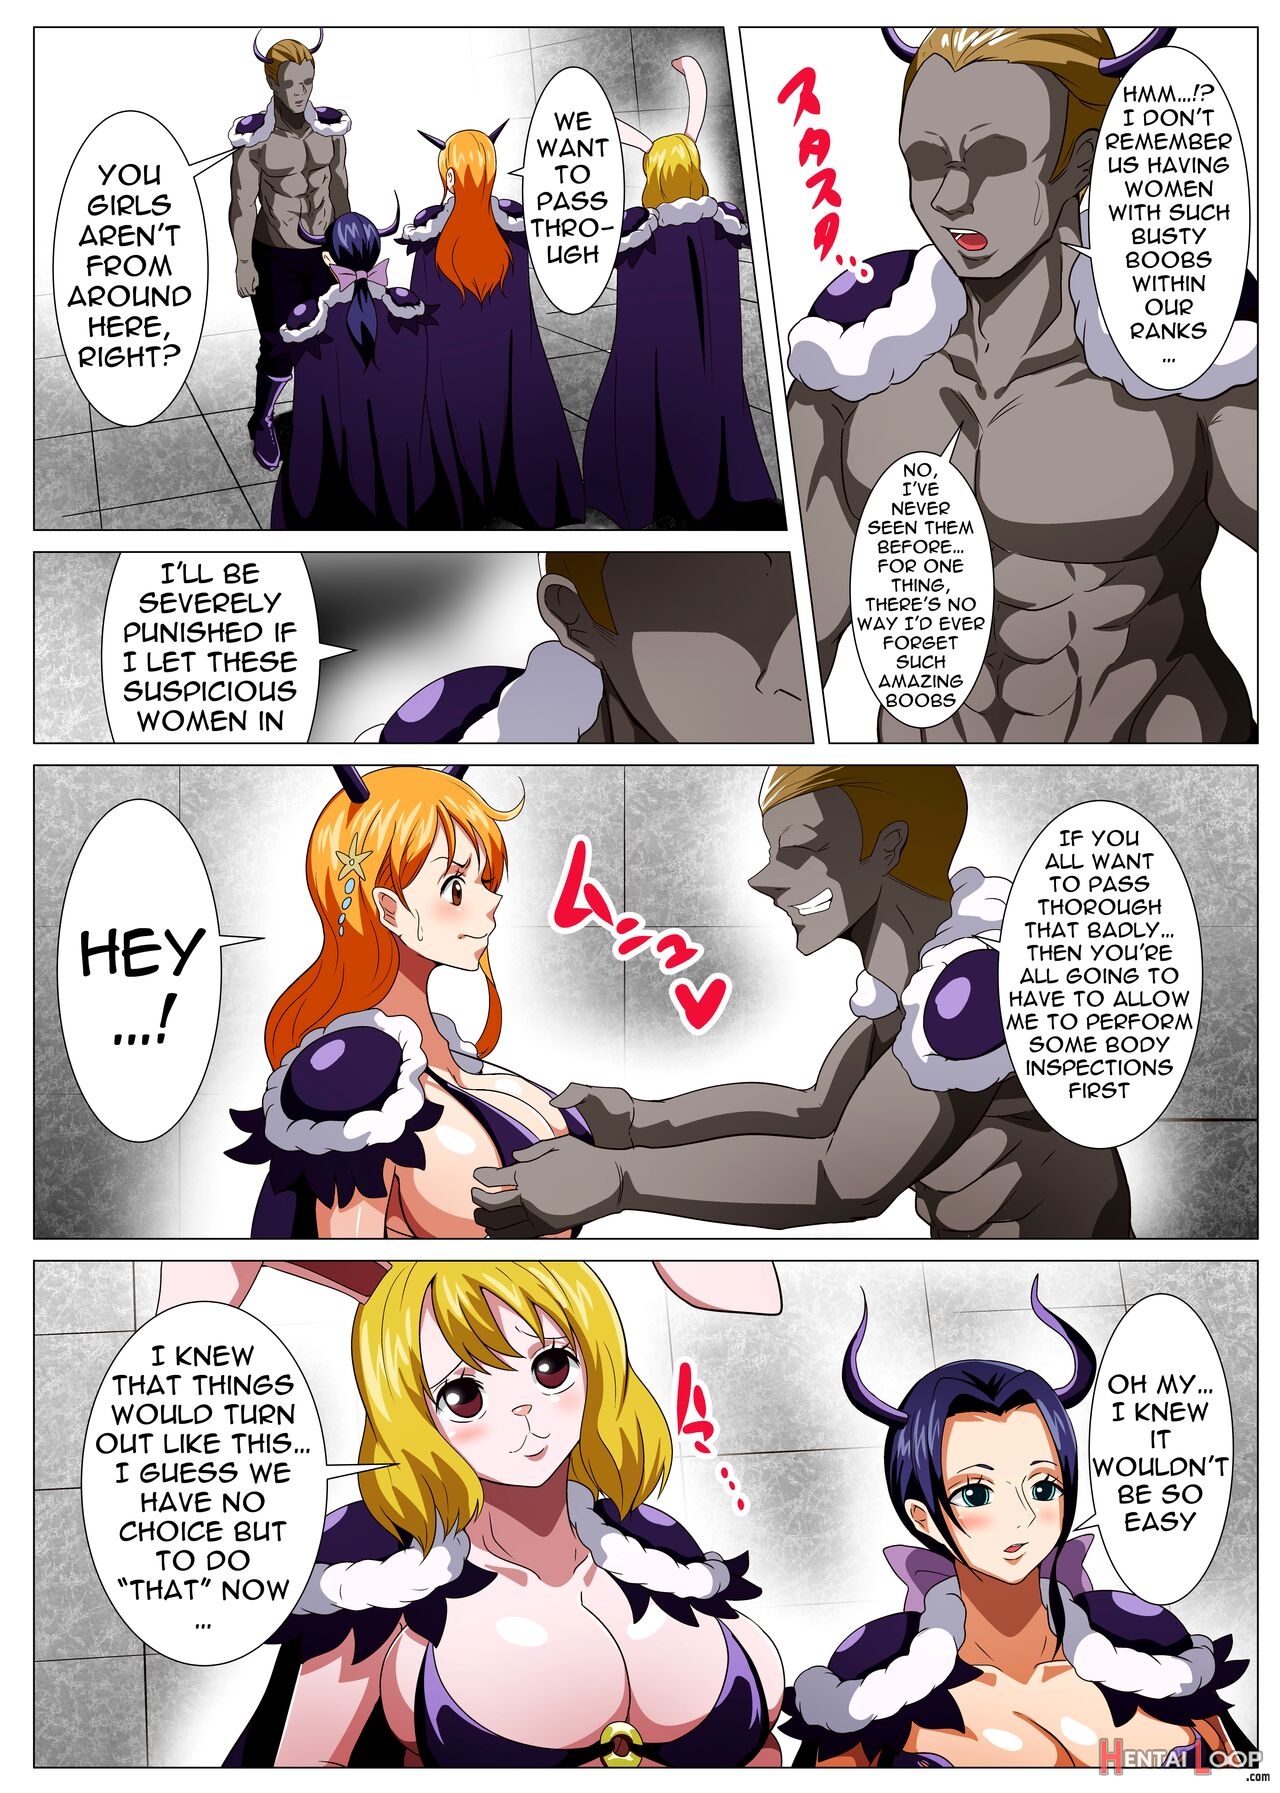 Getting Lewd In Oni Costumes page 4